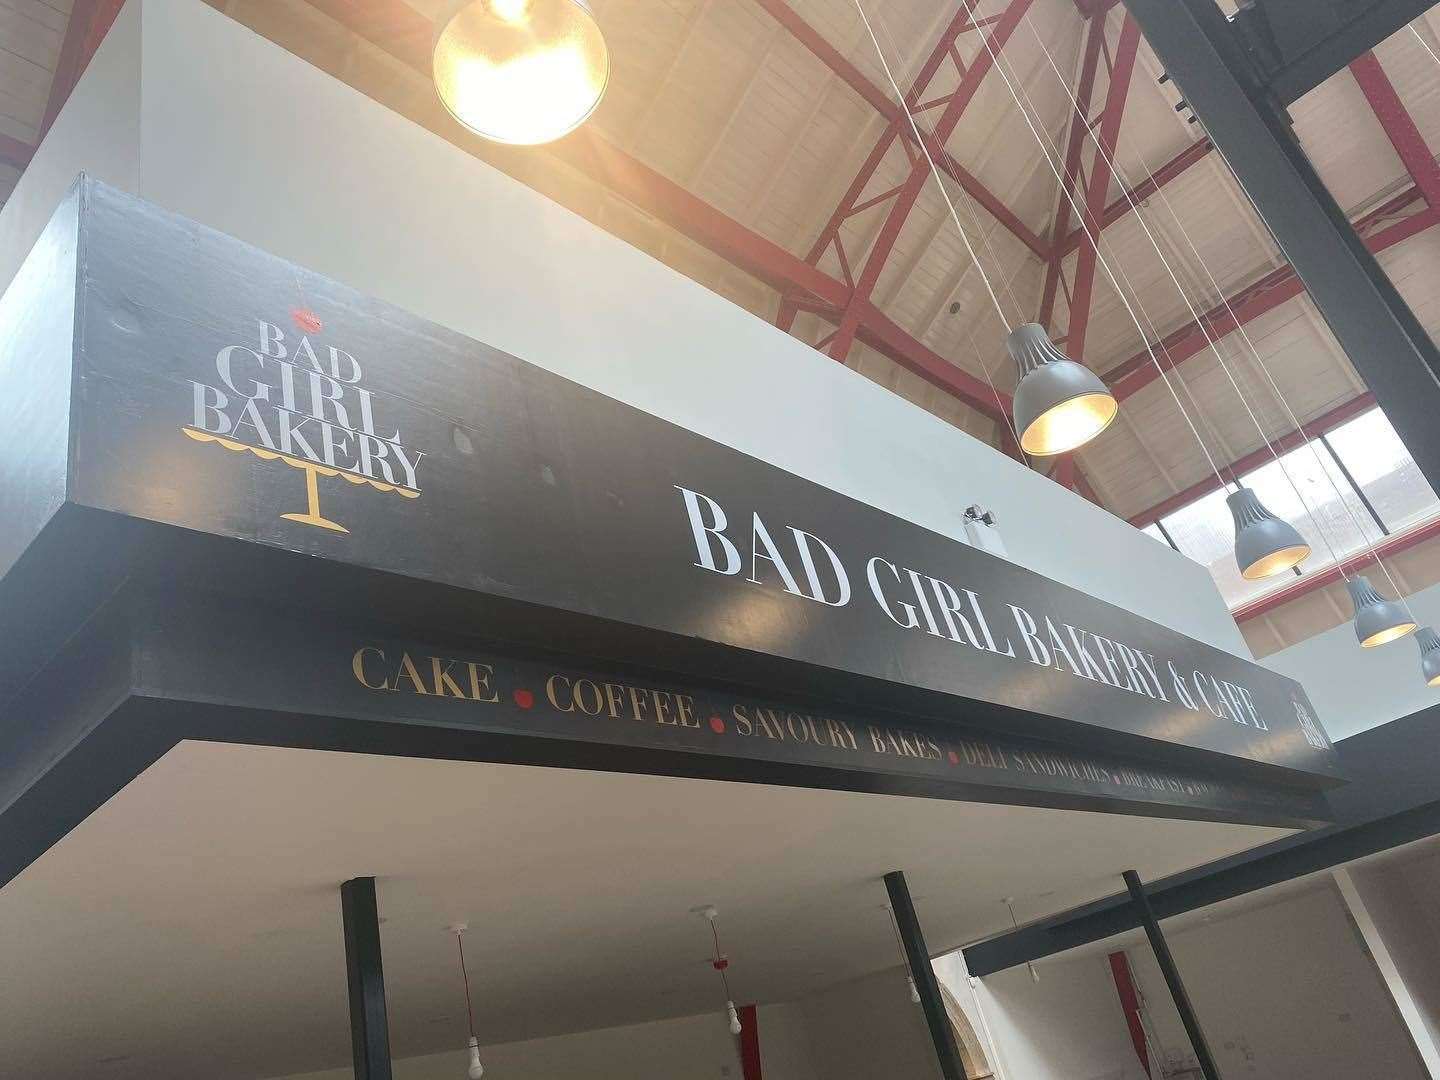 Bad Girl Bakery's new outlet in the Victorian Market.